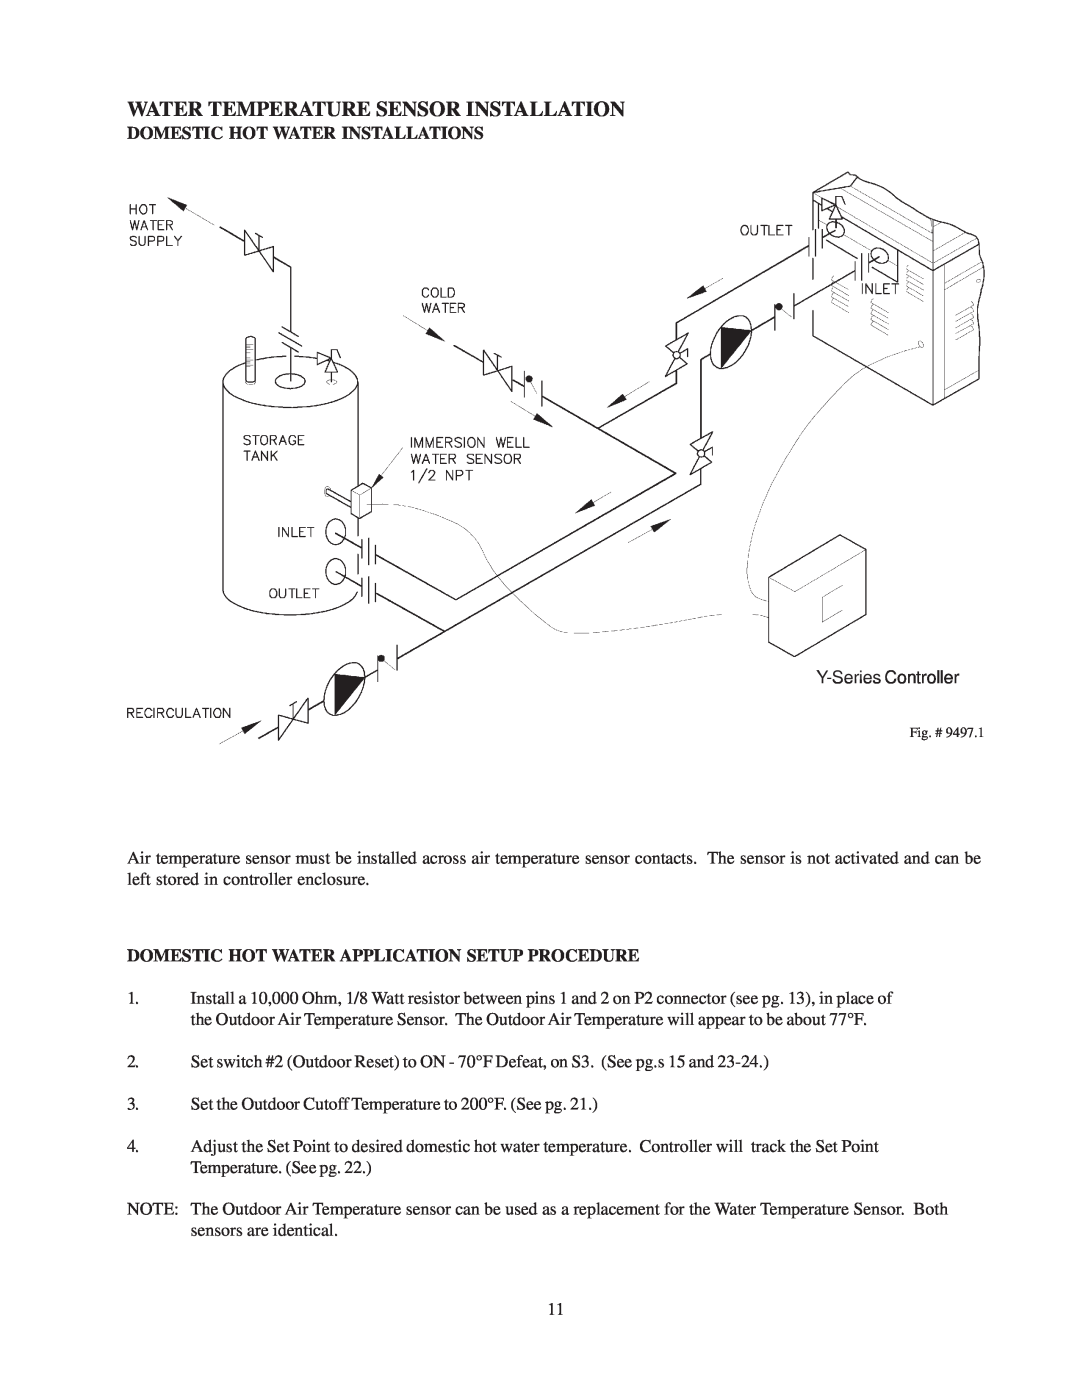 Raypak 240692 manual Domestic Hot Water Installations, Y-SeriesController, Domestic Hot Water Application Setup Procedure 